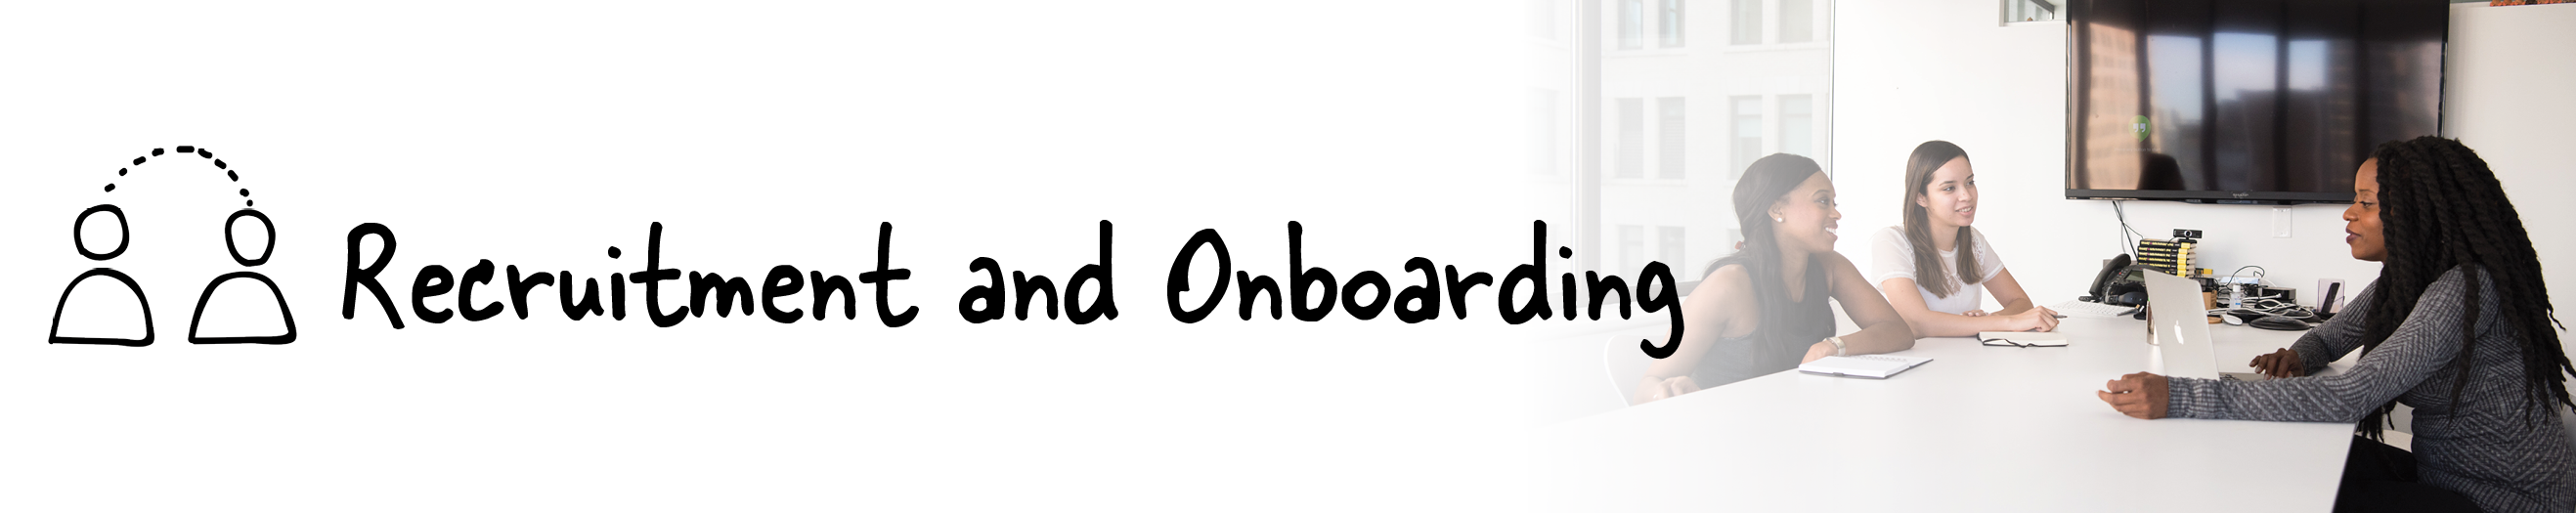 Recruitment and Onboarding